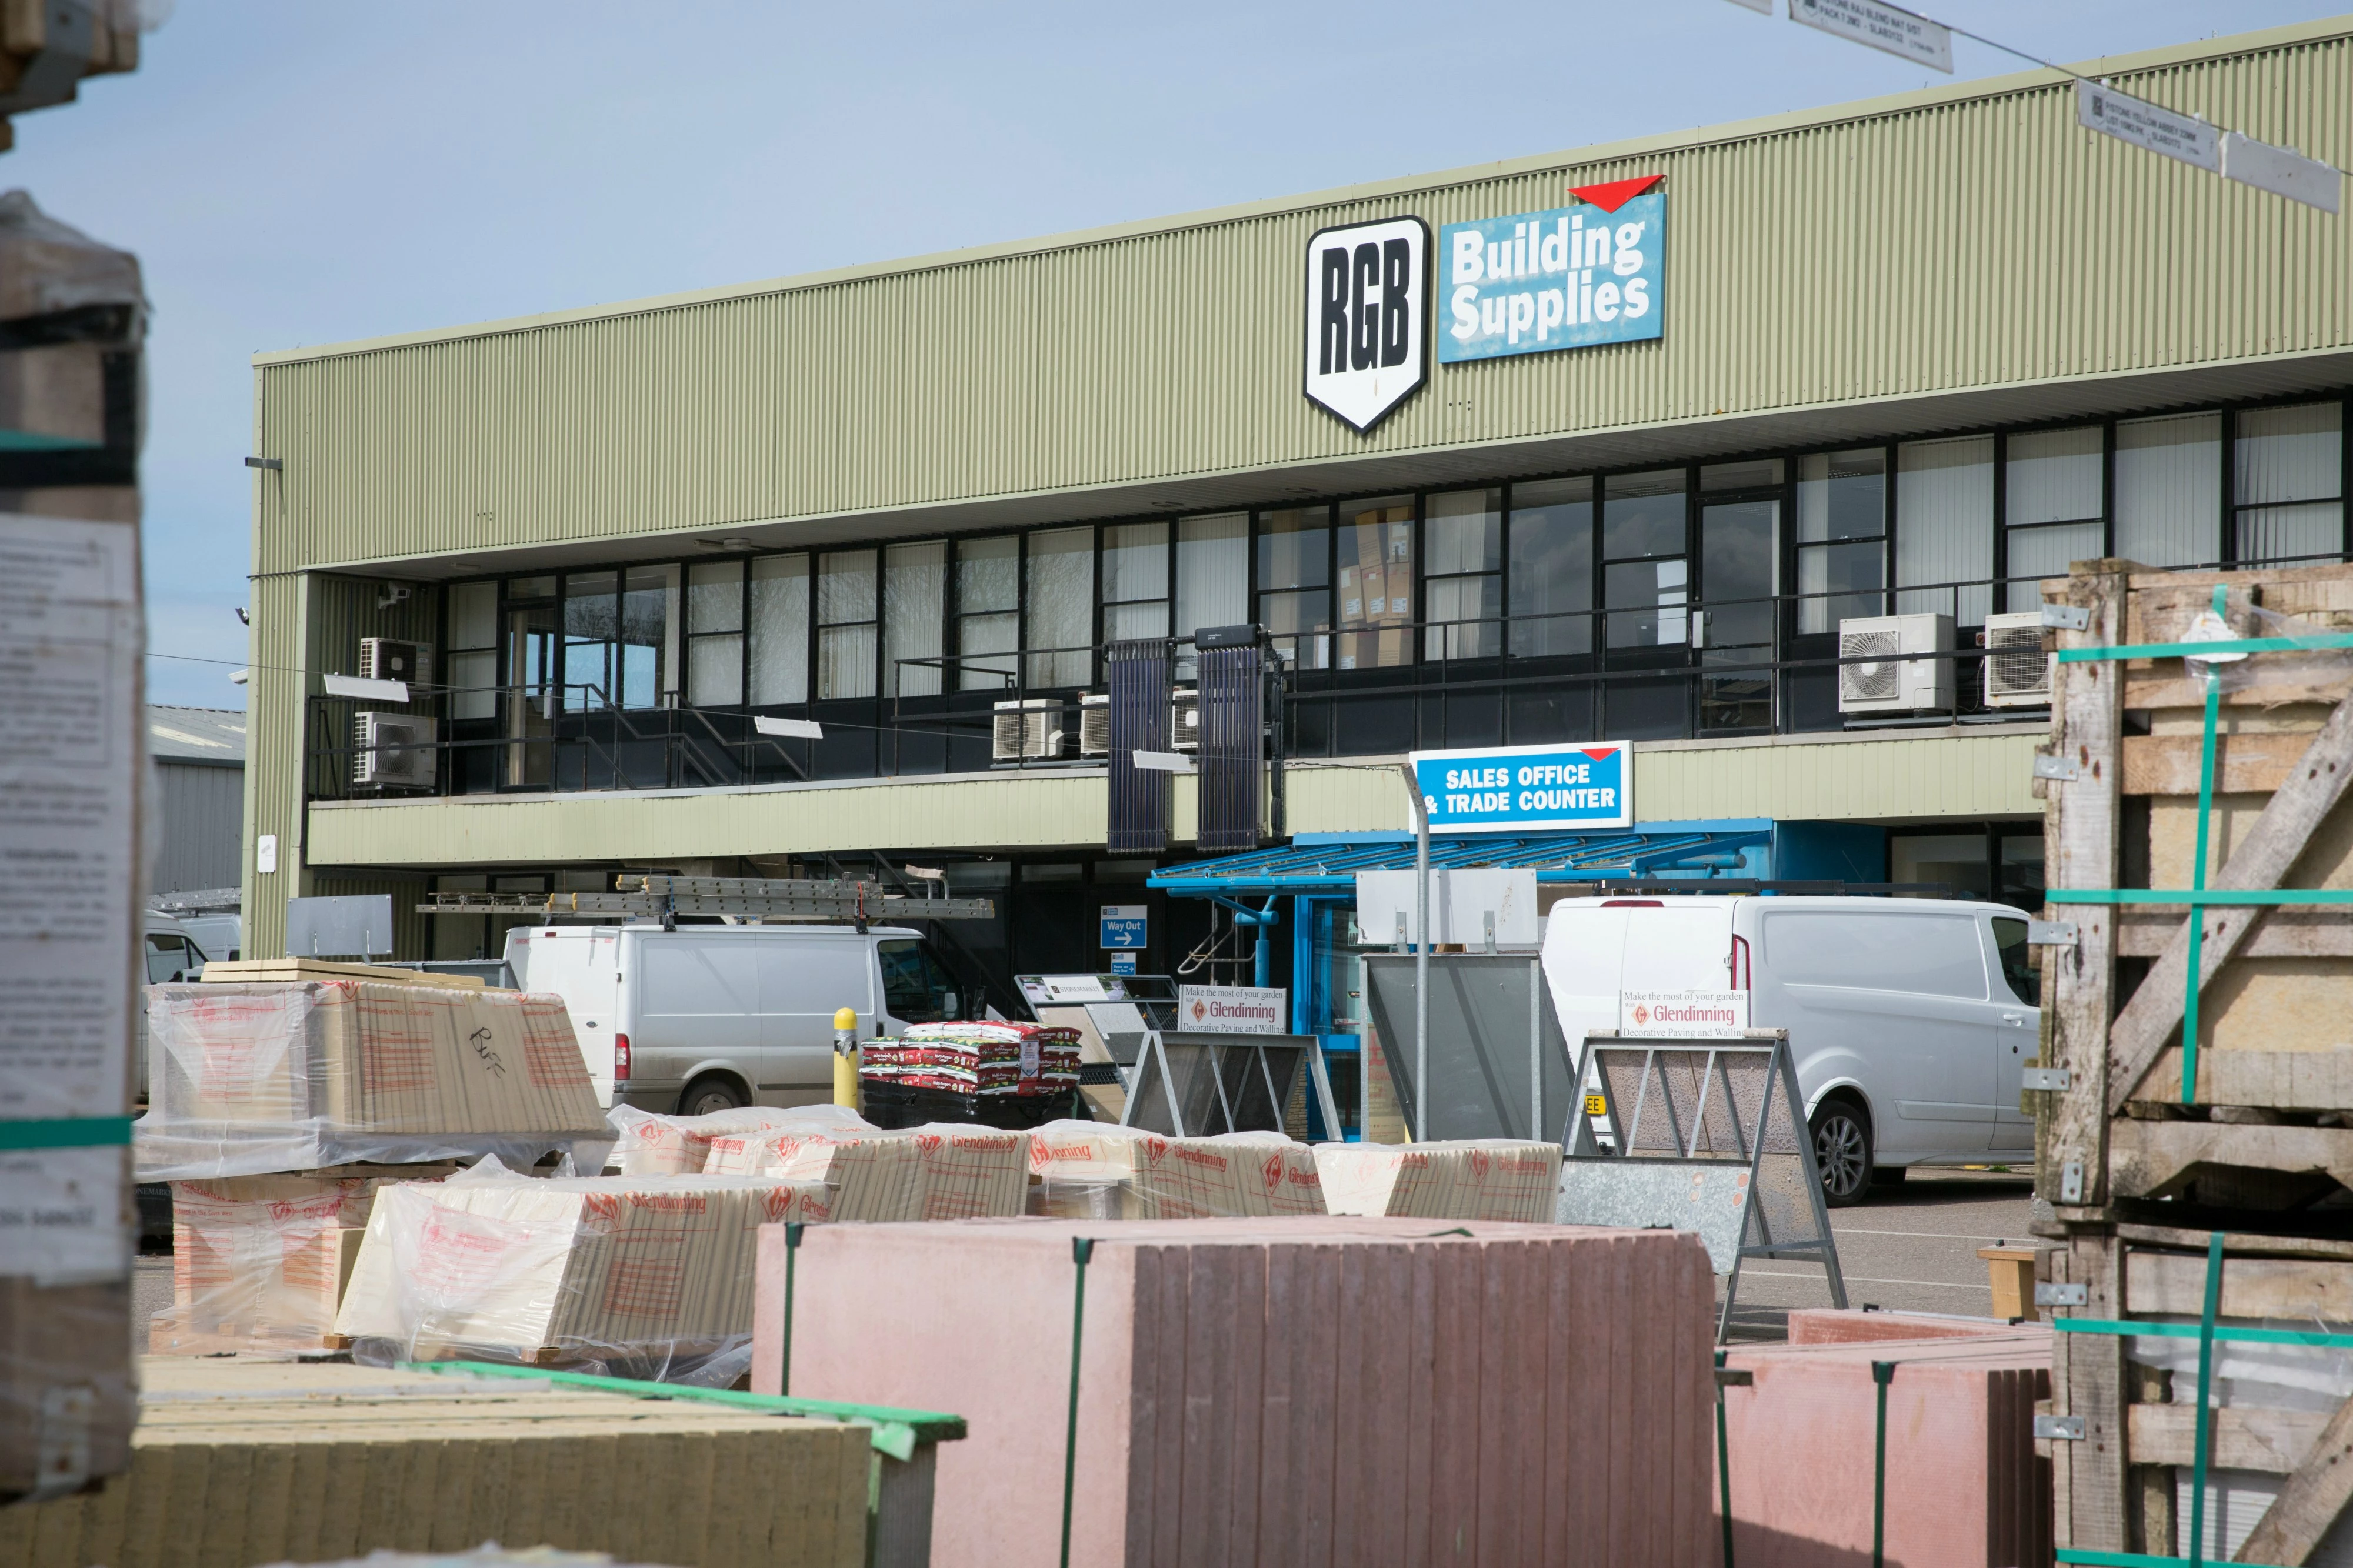 RGB Building Supplies' head office is remaining in Barnstaple depsite acquisition